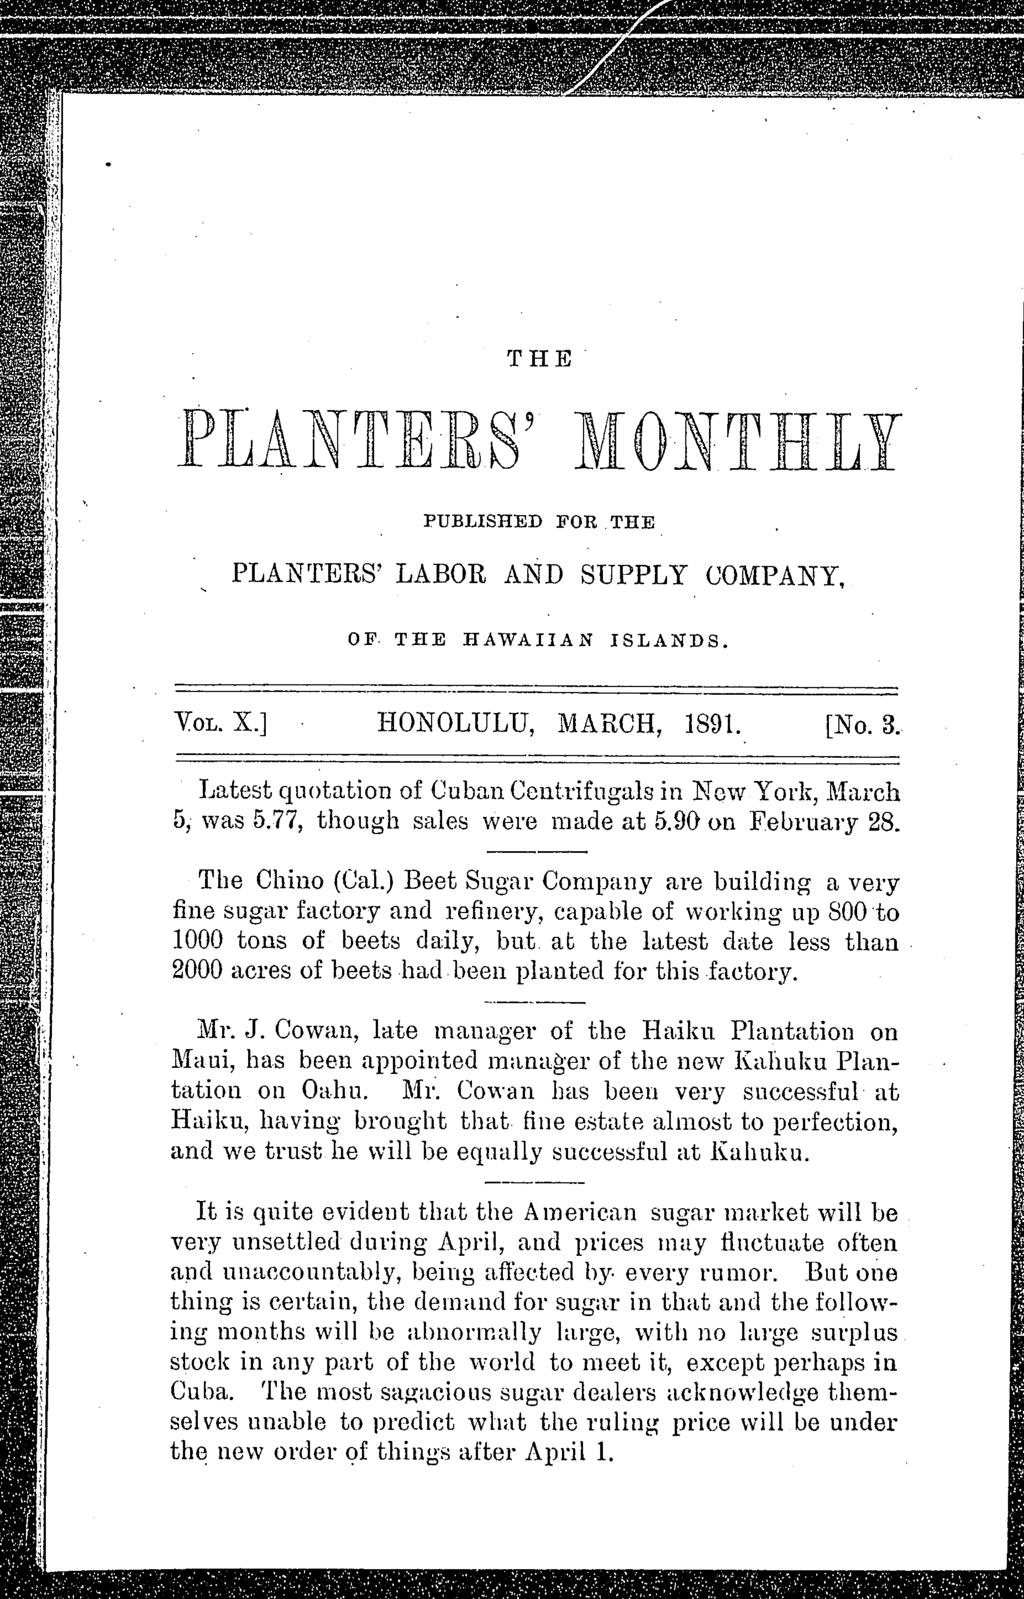 THE PLANTERS9 MONTHLY PUBLISHED FOR THE PLANrrERS' LABOR AND SUPPLY COMPANY, OF THE HAWAIIAN ISLANDS. VOL. X.] HONOLULU, MARCH, 1891. [No.3.